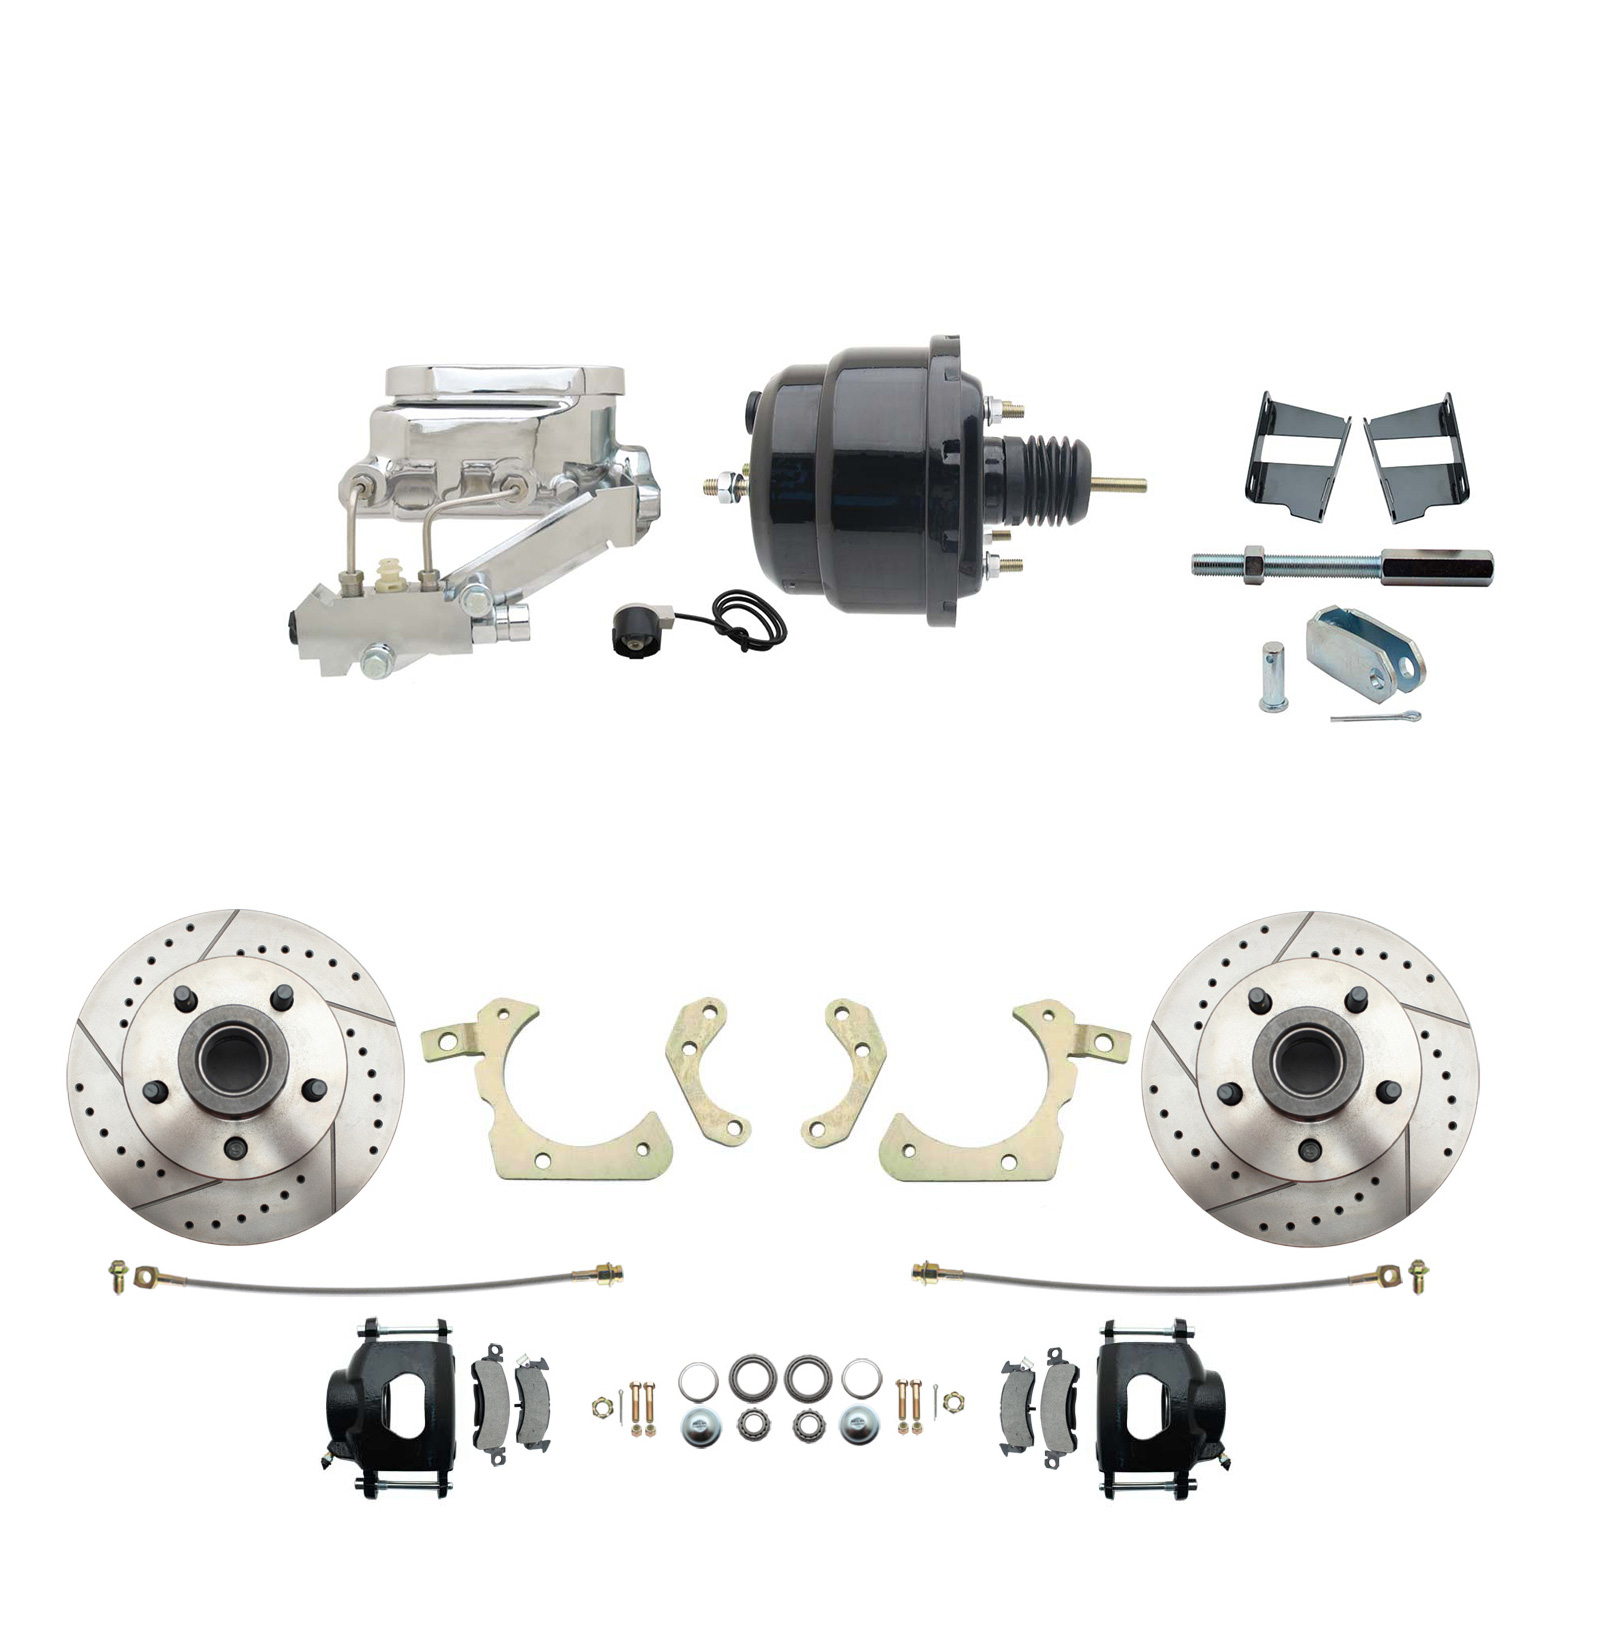 1959-1964 GM Full Size Front Disc Brake Kit Black Powder Coated Calipers Drilled/Slotted Rotors (Impala, Bel Air, Biscayne) & 8 Dual Powder Coated Black Booster Conversion Kit W/ Chrome Flat Top Master Cylinder Left Mount Dis